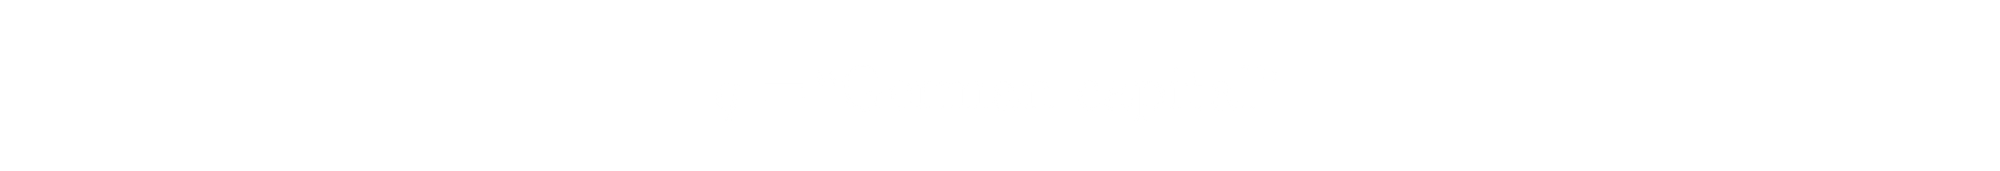 Black background with white text reading "q = 'German capital'"